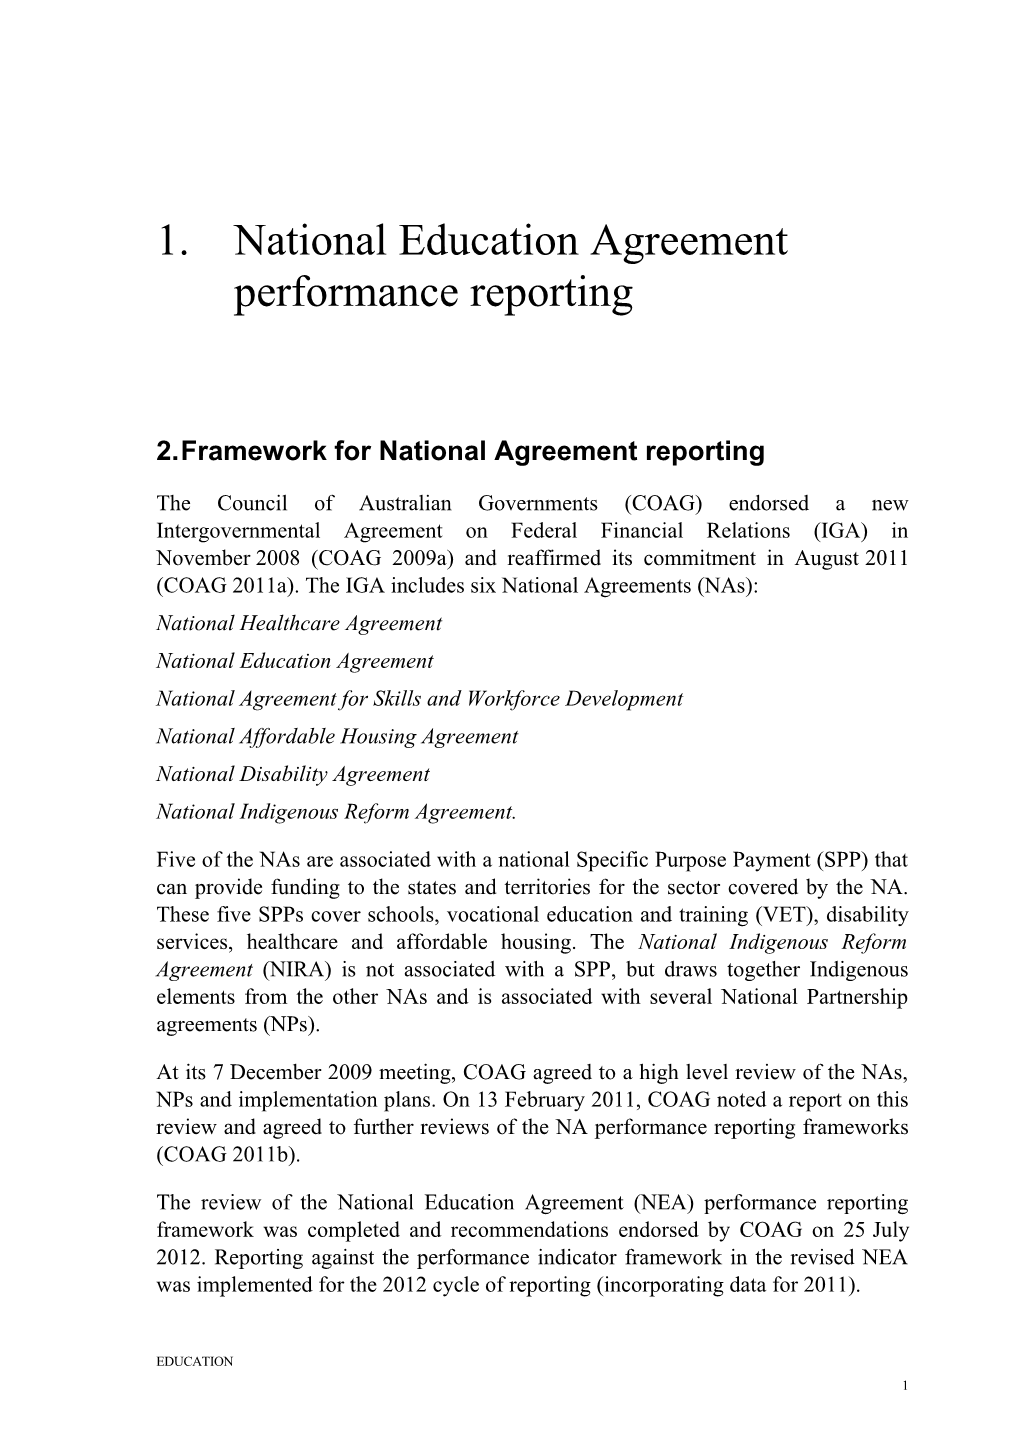 National Education Agreement Performance Reporting